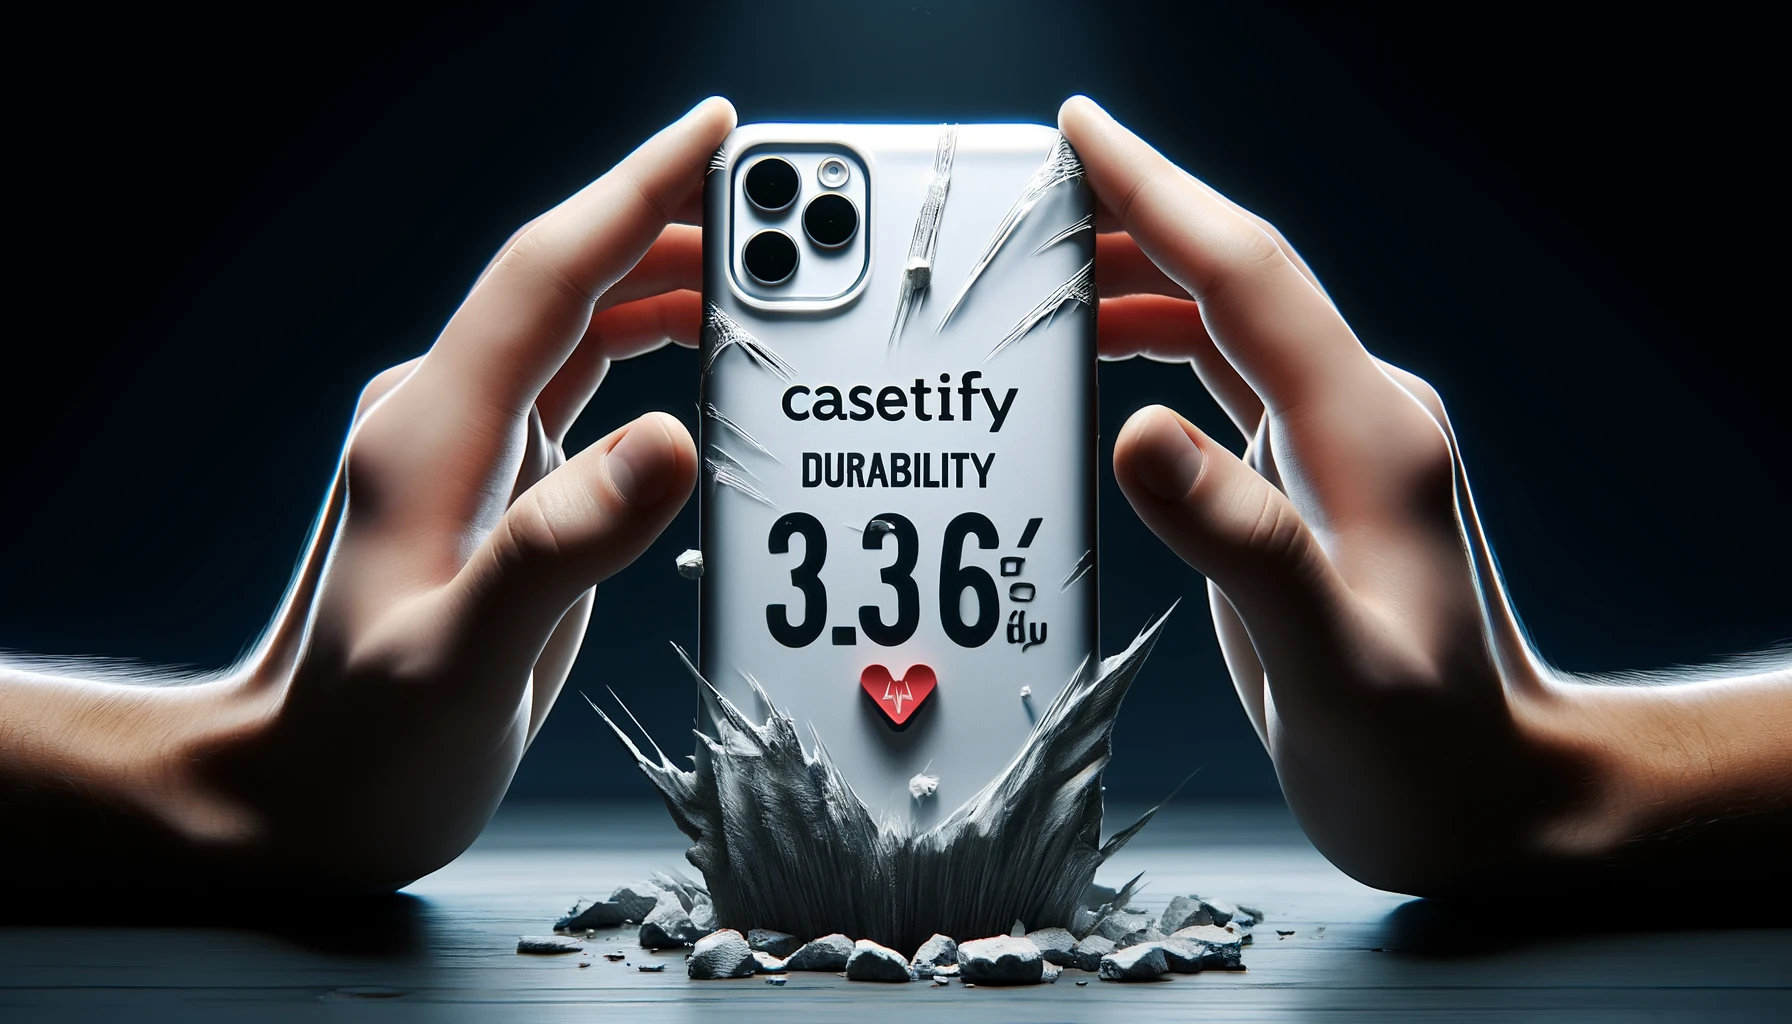 An image demonstrating the durability of CASETiFY phone cases. Show a phone case being subjected to various durability tests like drop tests and scratch tests, with the word 'CASETiFY' prominently displayed.